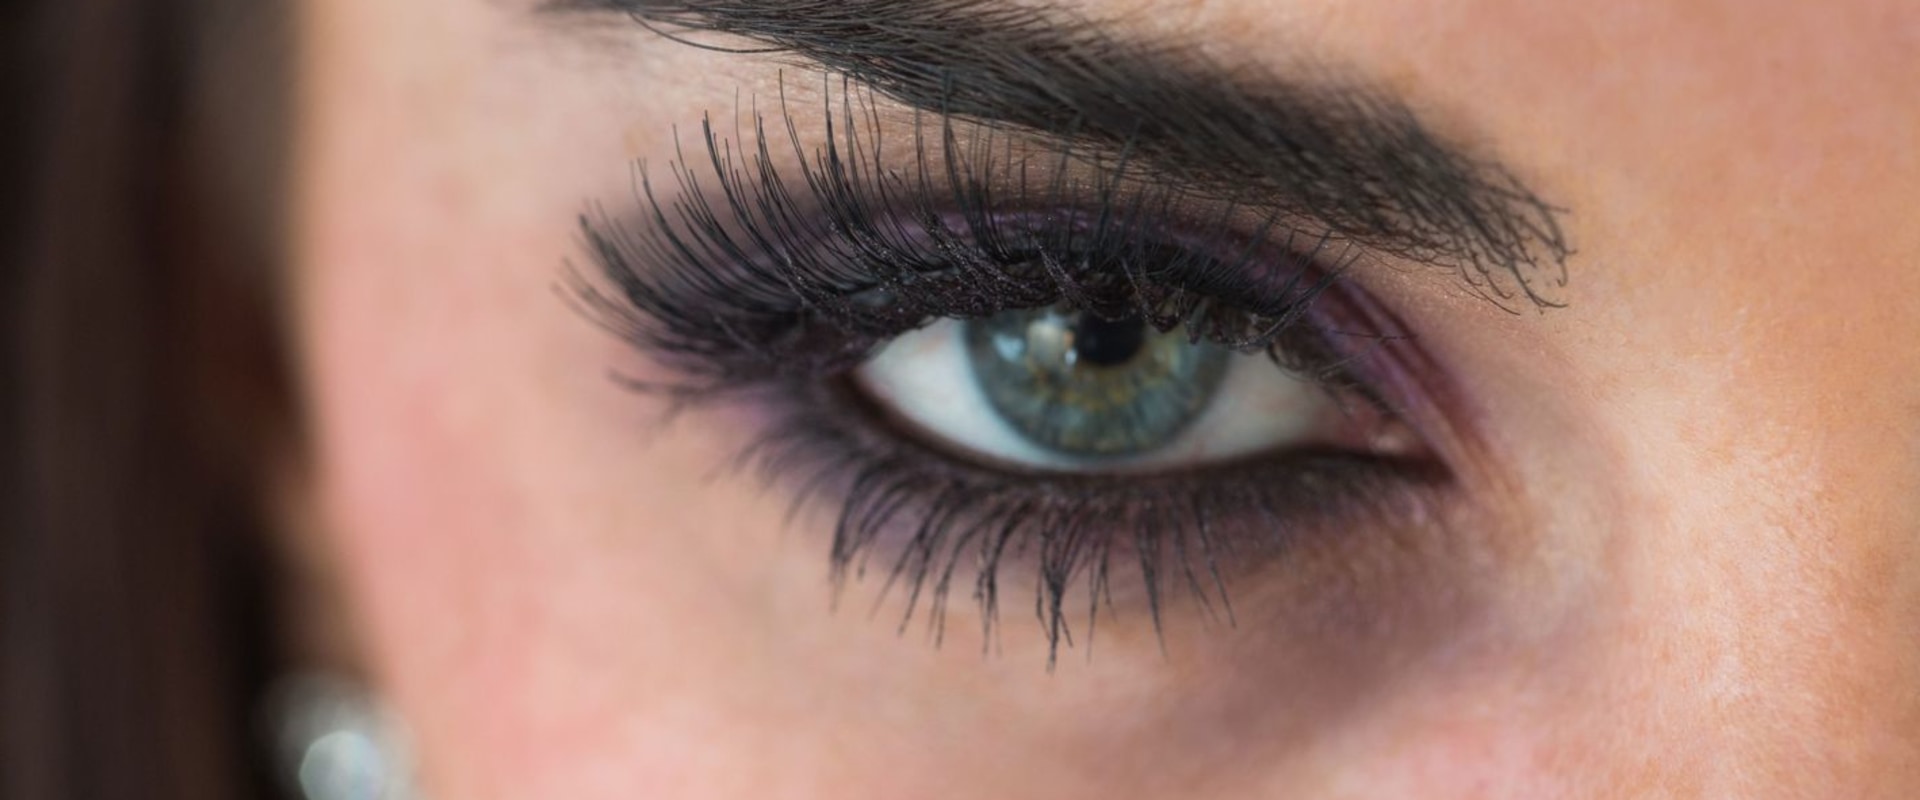 Why do lash extensions make you look better?